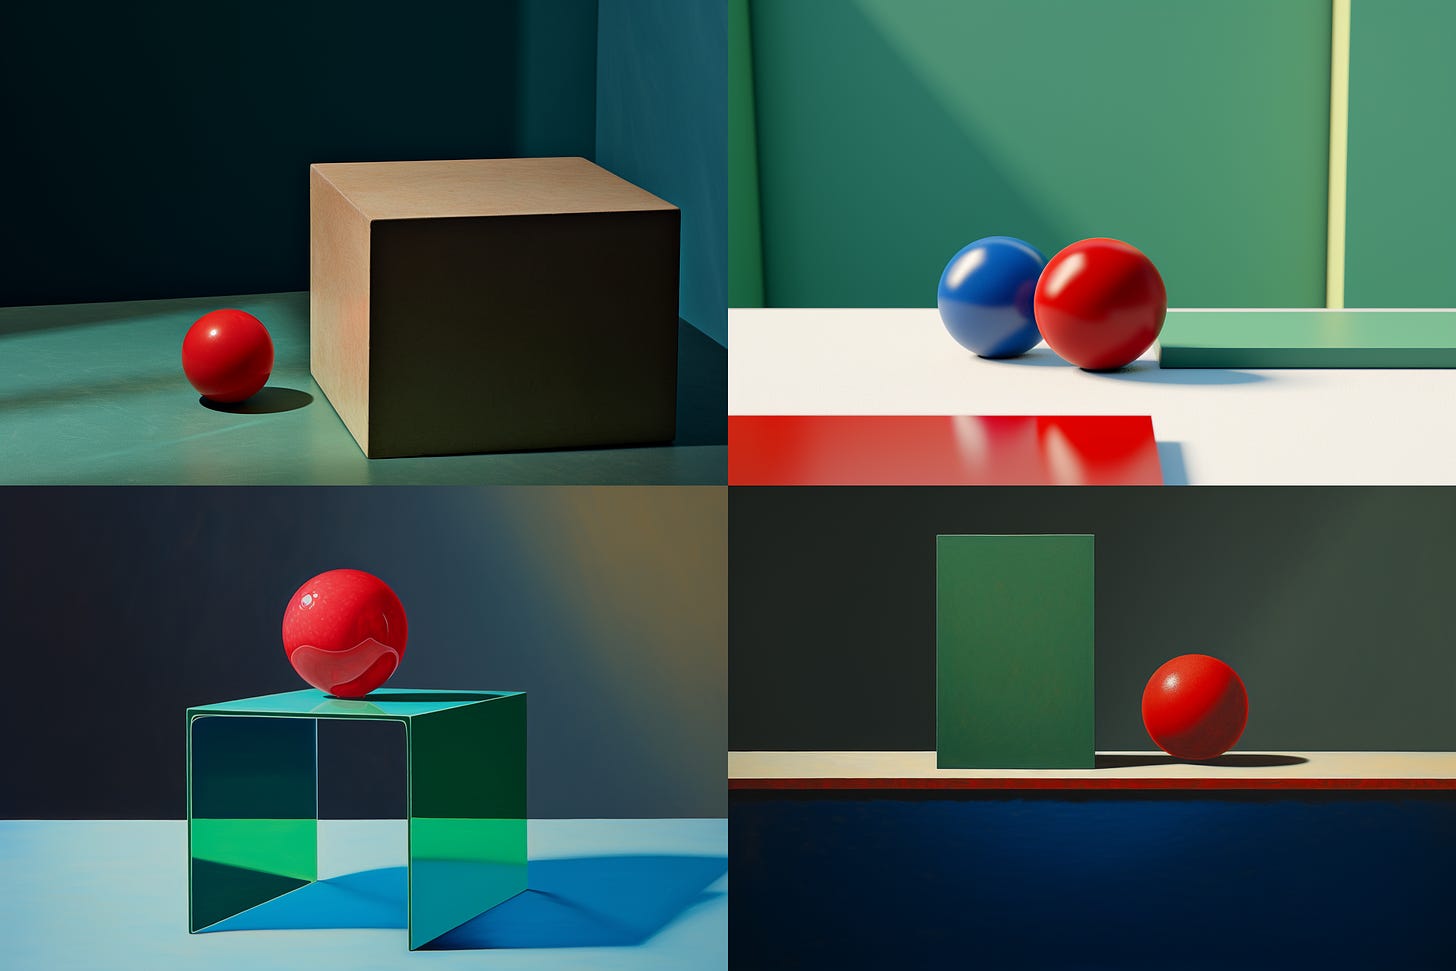 Midjourney V5.2 results for "two red balls and one blue cube on a green table"Two red balls and one blue cube on a green table - Midjourney V 5.2